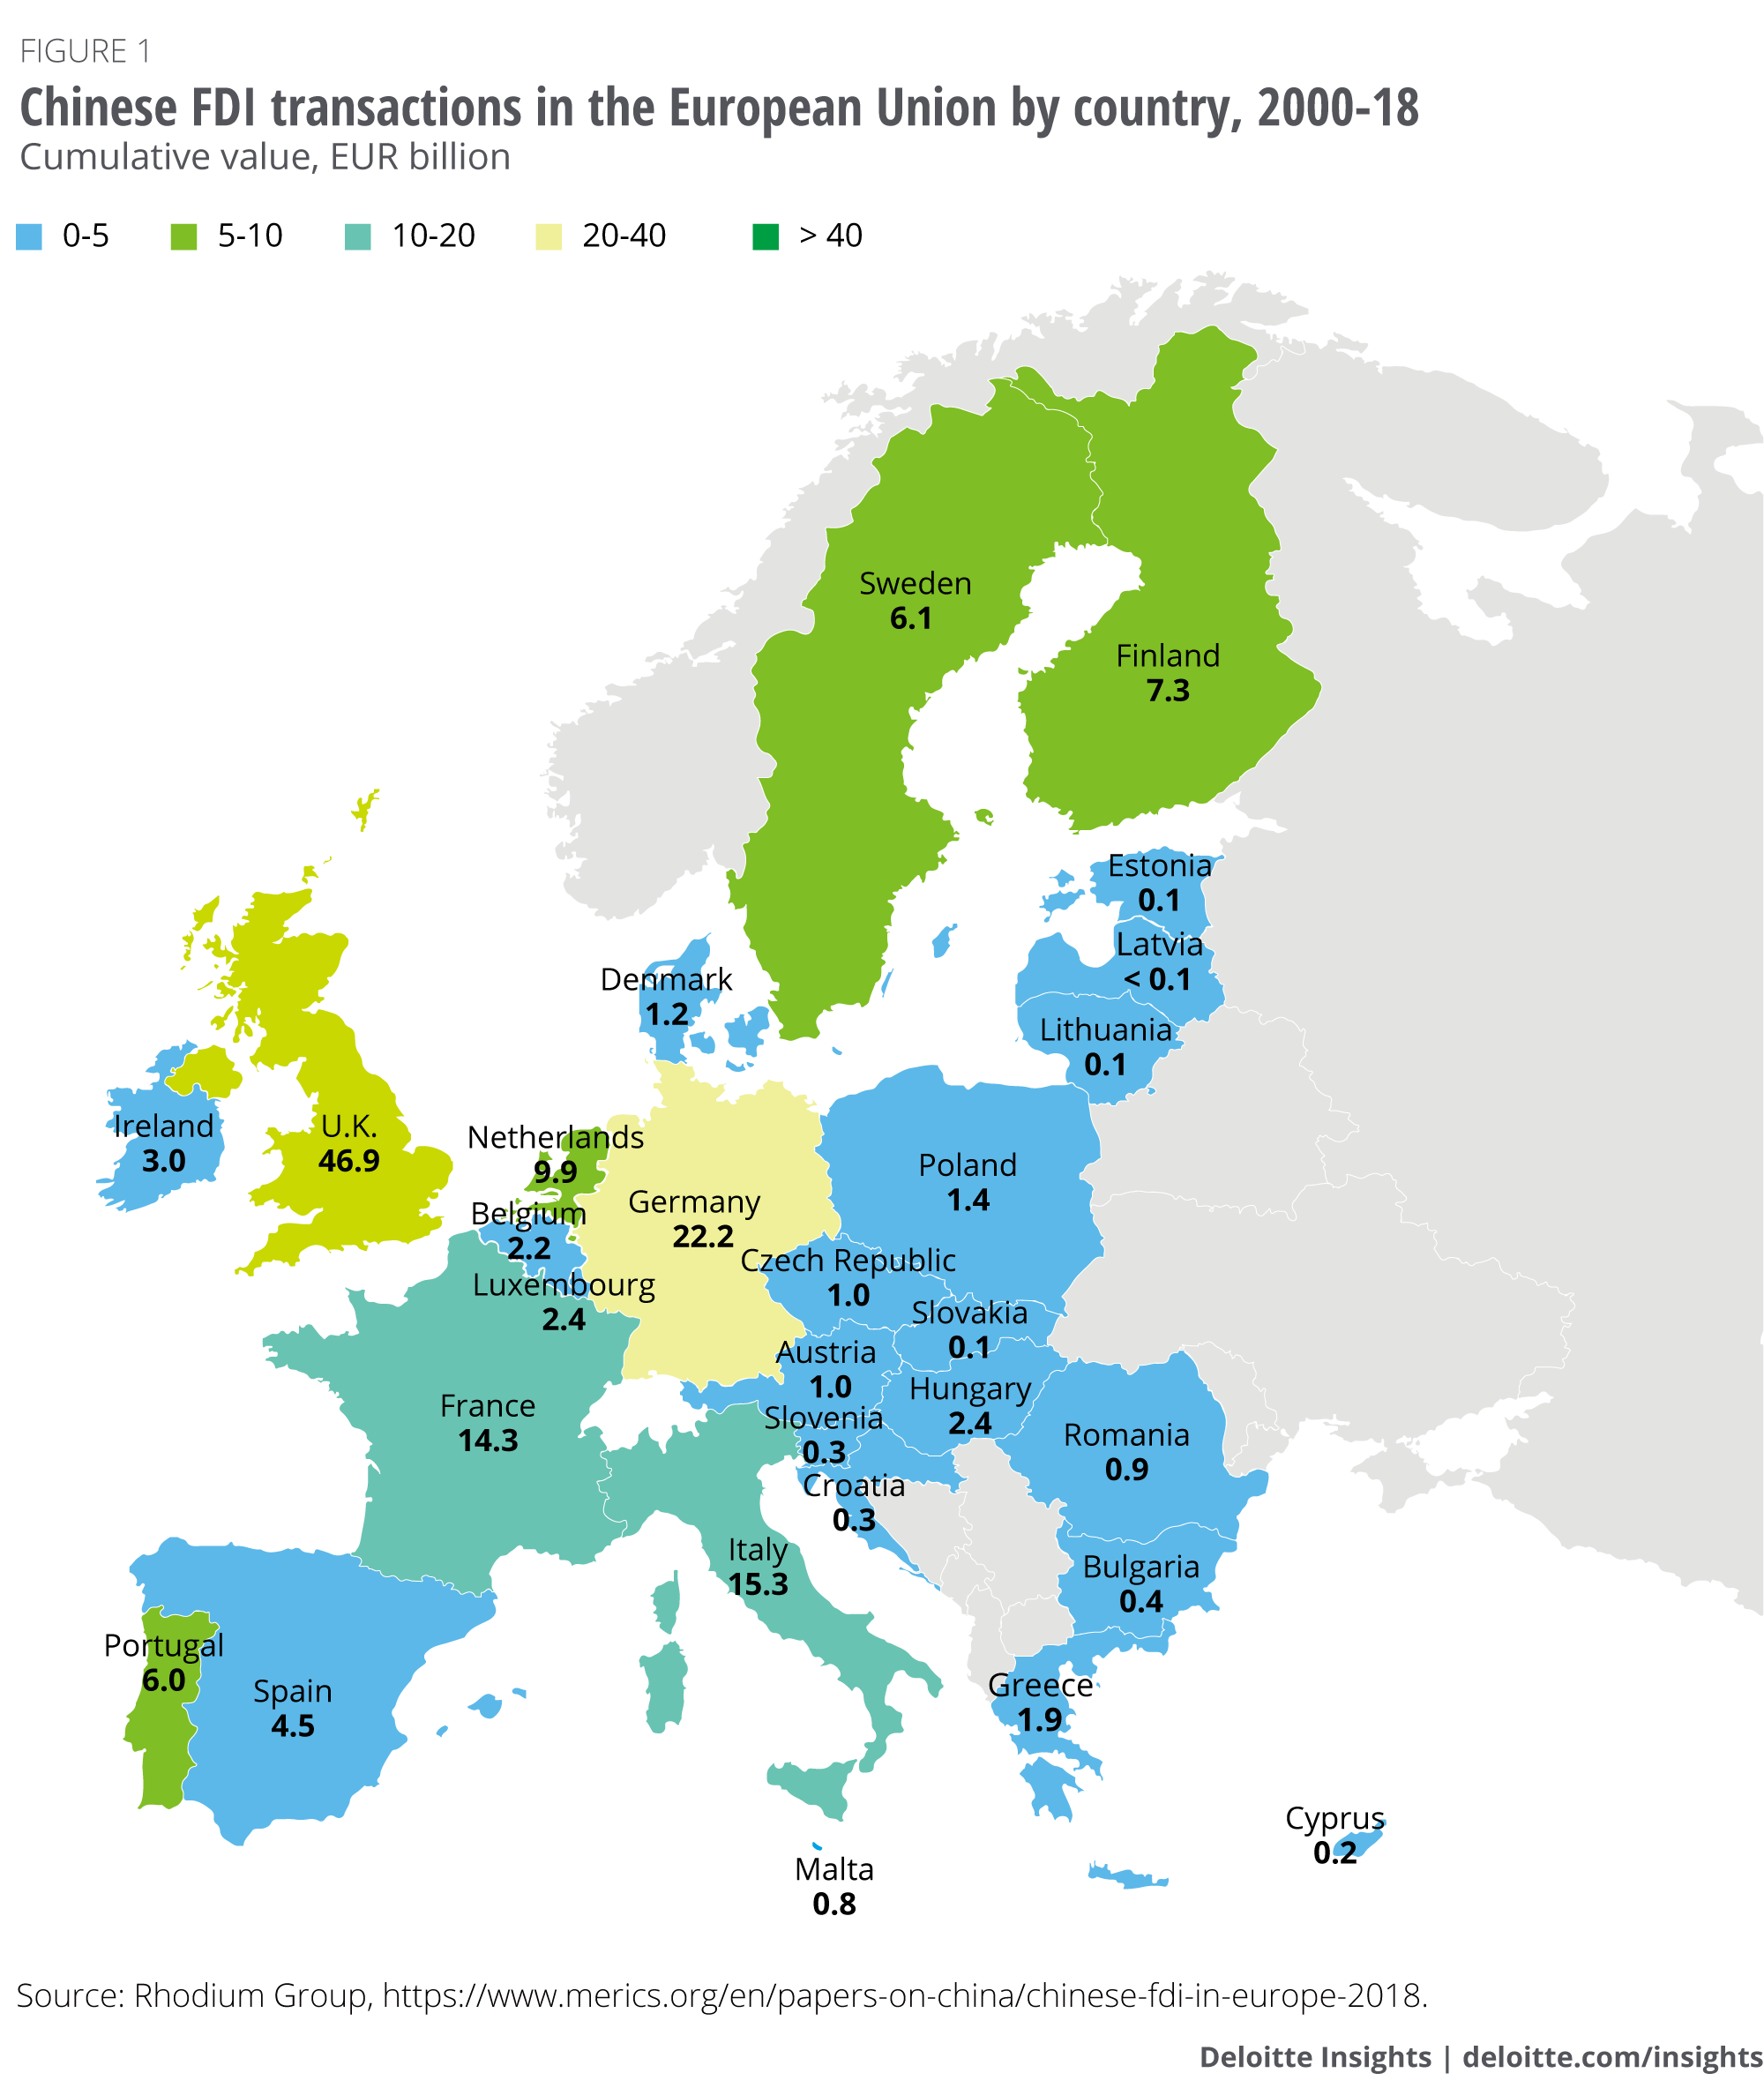 Chinese FDI transactions in the European Union by country, 2000-18